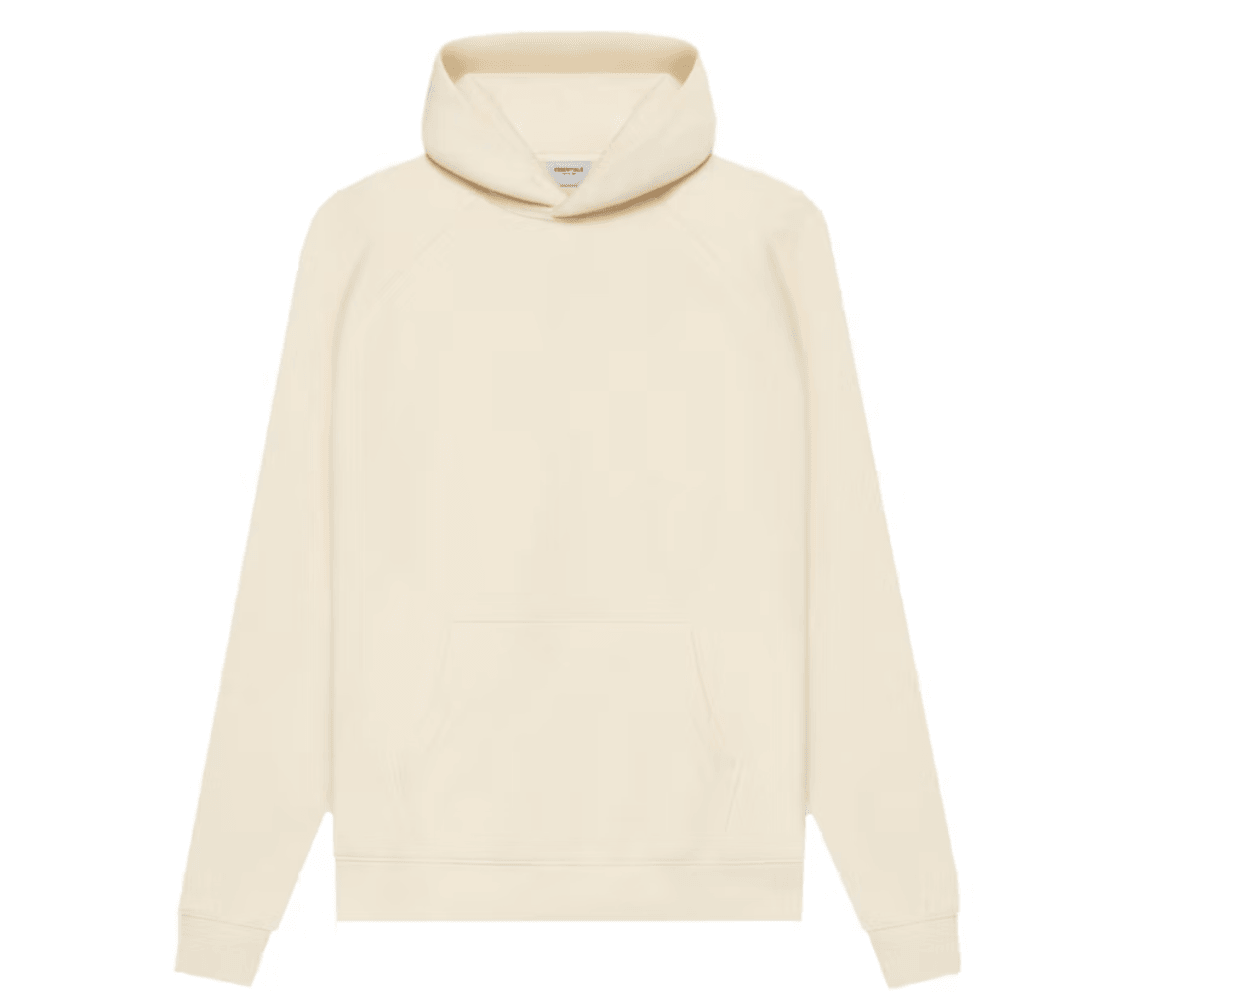 FEAR OF GOD ESSENTIALS PULL OVER HOODIE 'CREAM' - The Flaire